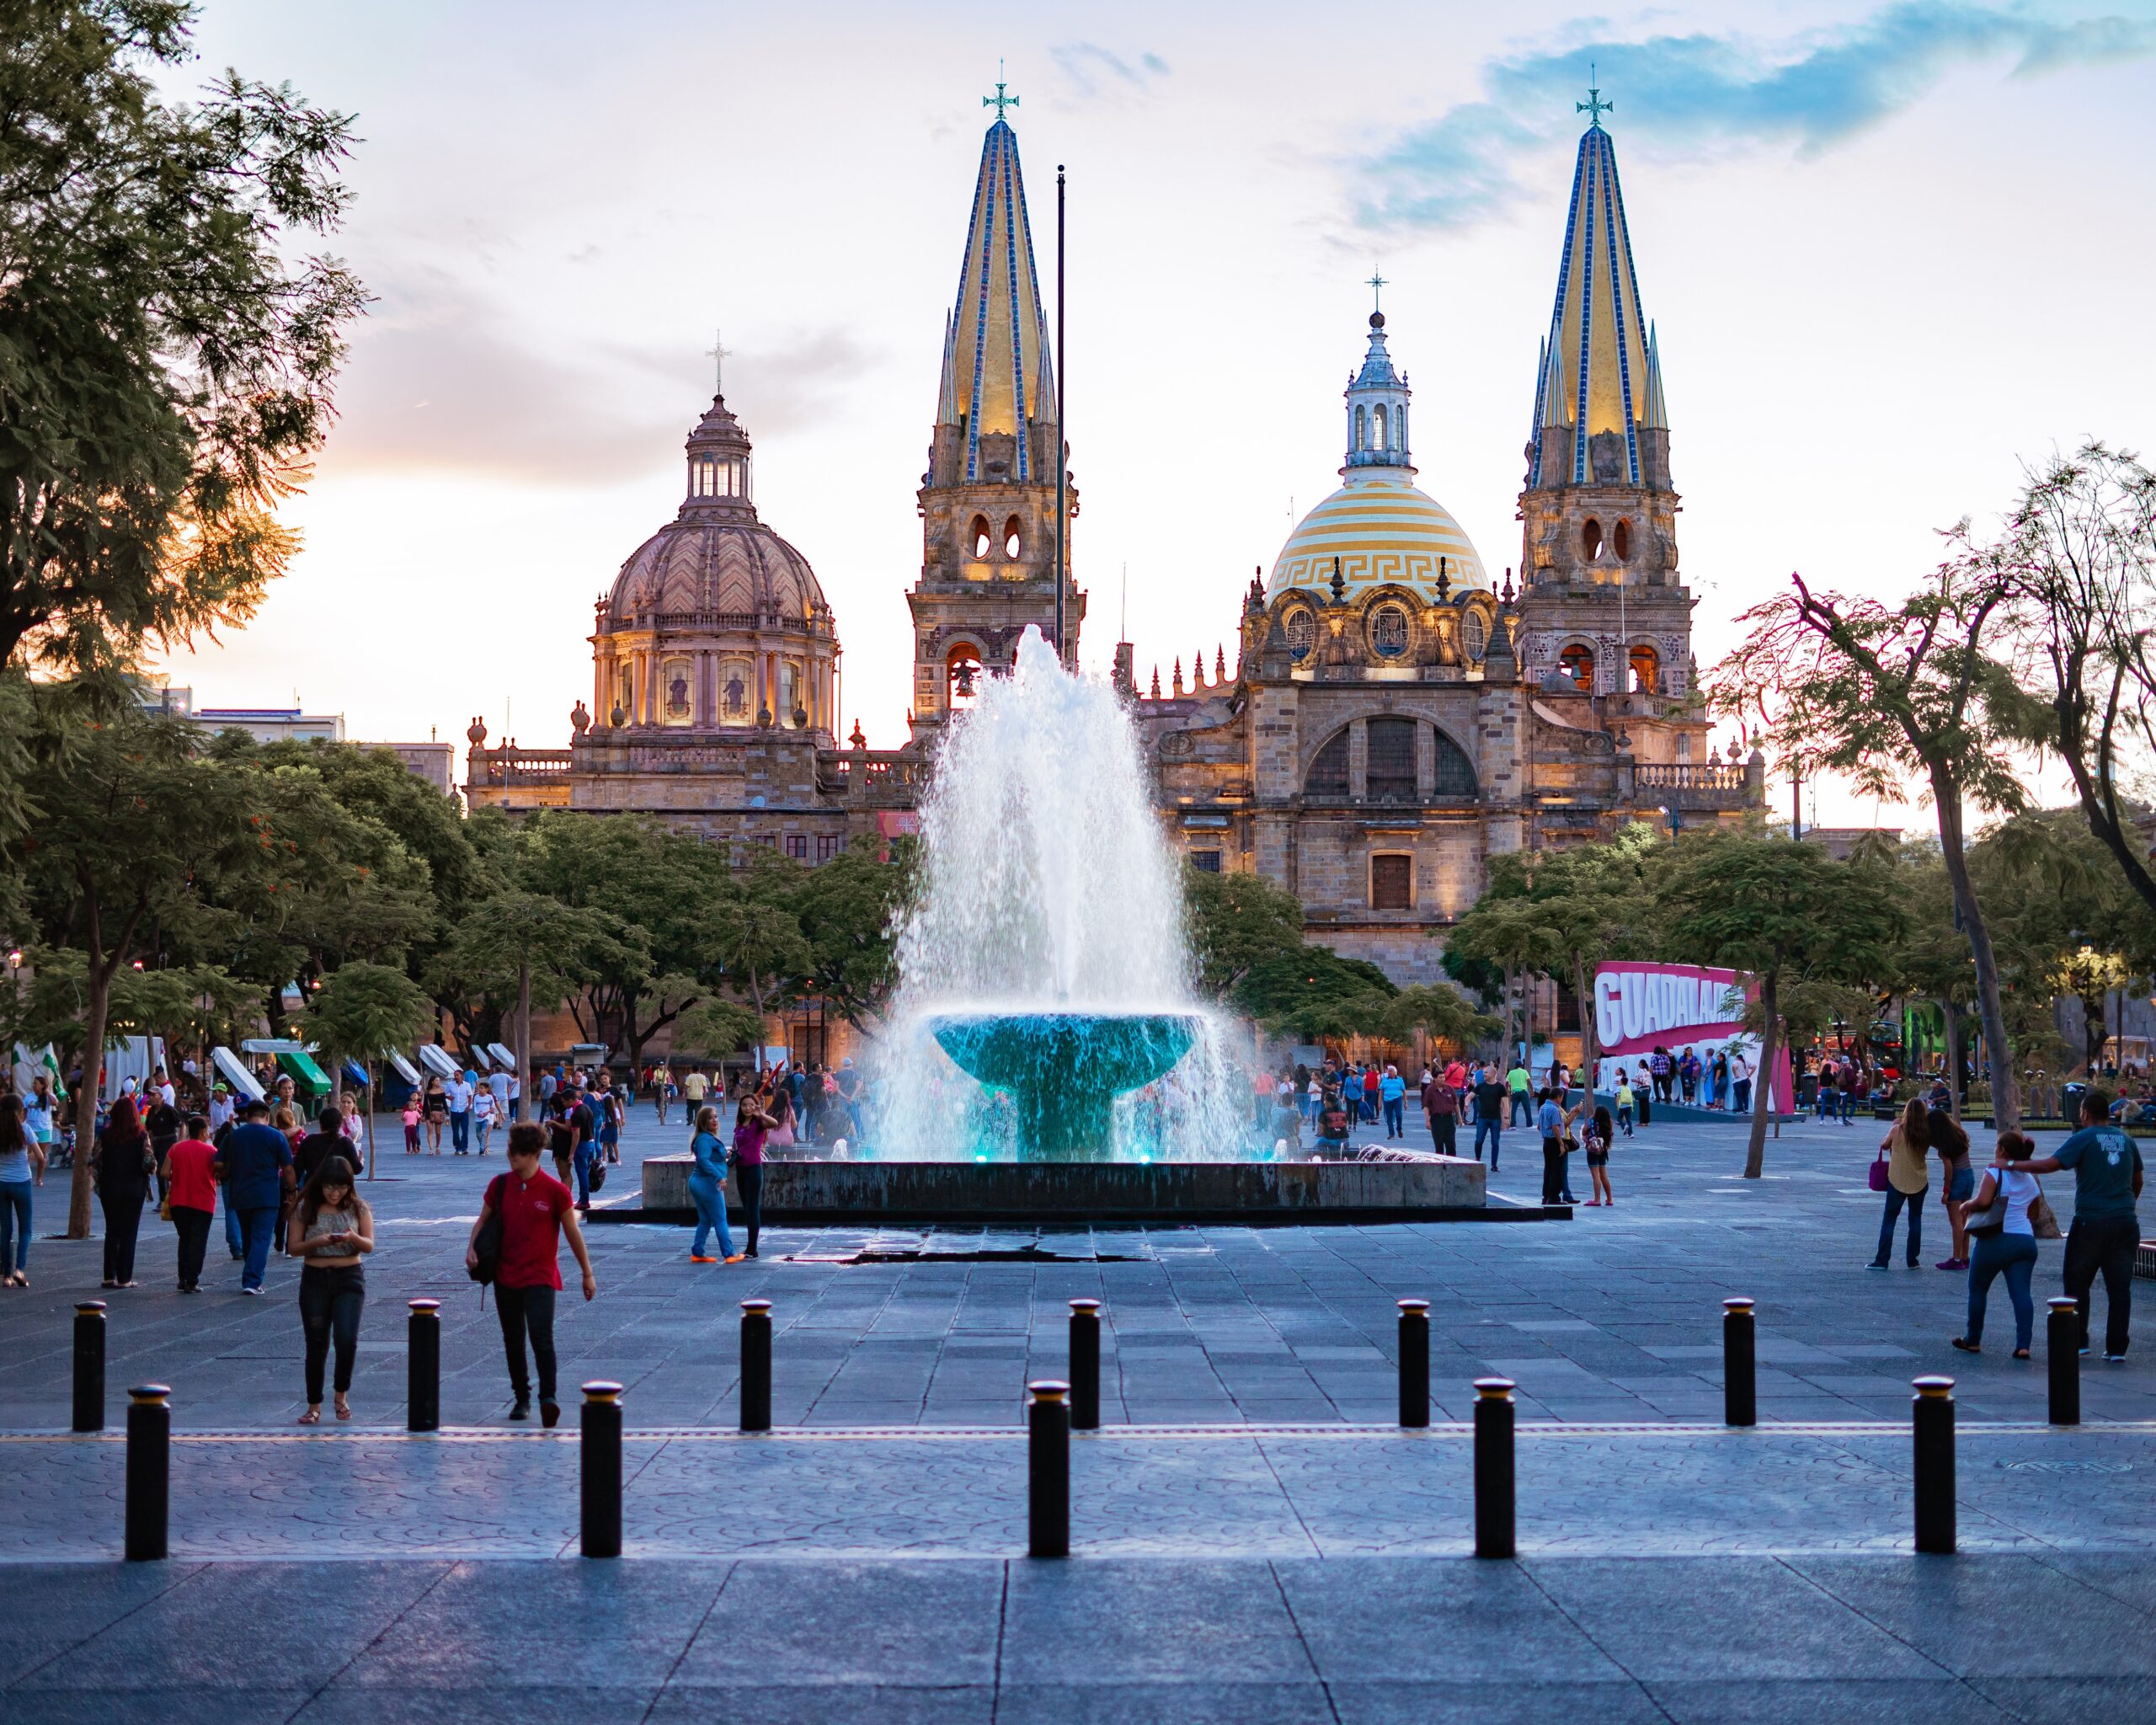 Travelers of Guadalajara should be sure to research the area before traveling to ensure their safety. 
pictured: The city center of Guadalajara complete with a tourism sign with the cities name and fountain that pedestrians walk around 